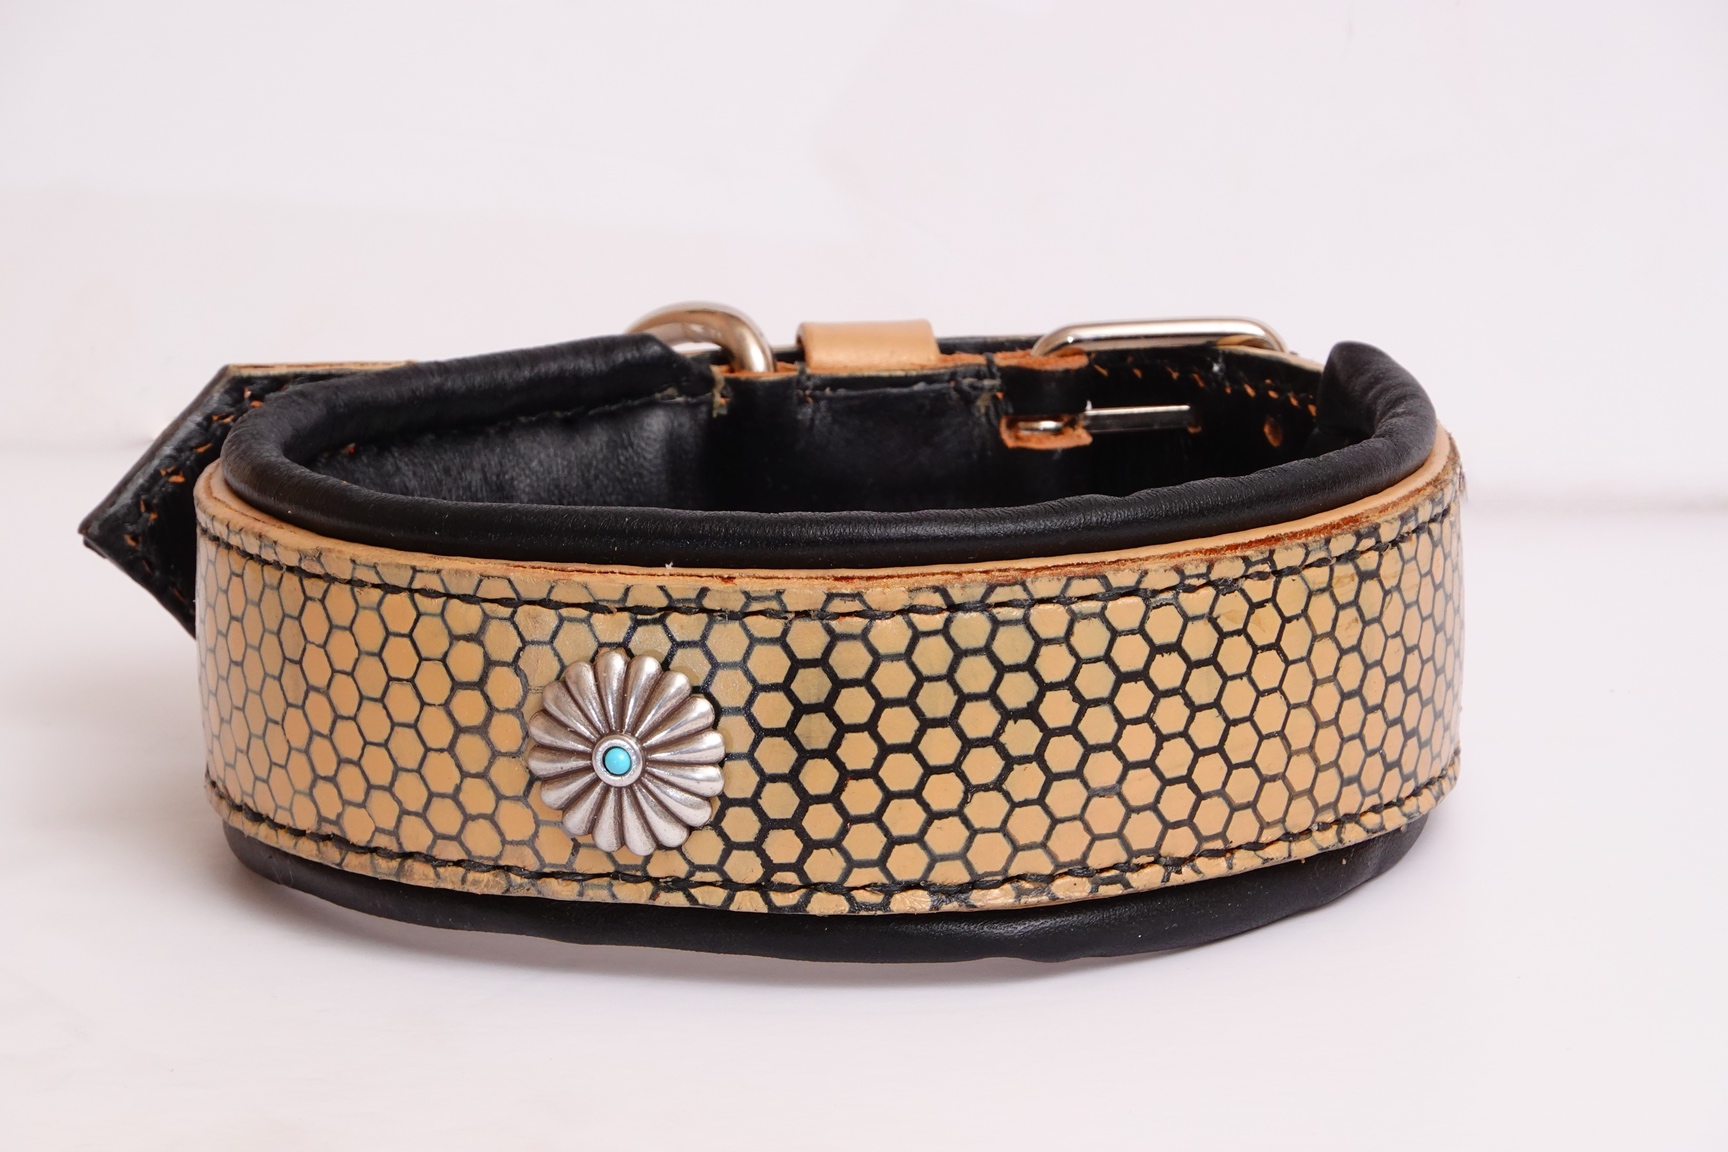 Louis Vuitton Dog Collar: A Luxury Accessory for Your Furry Friend